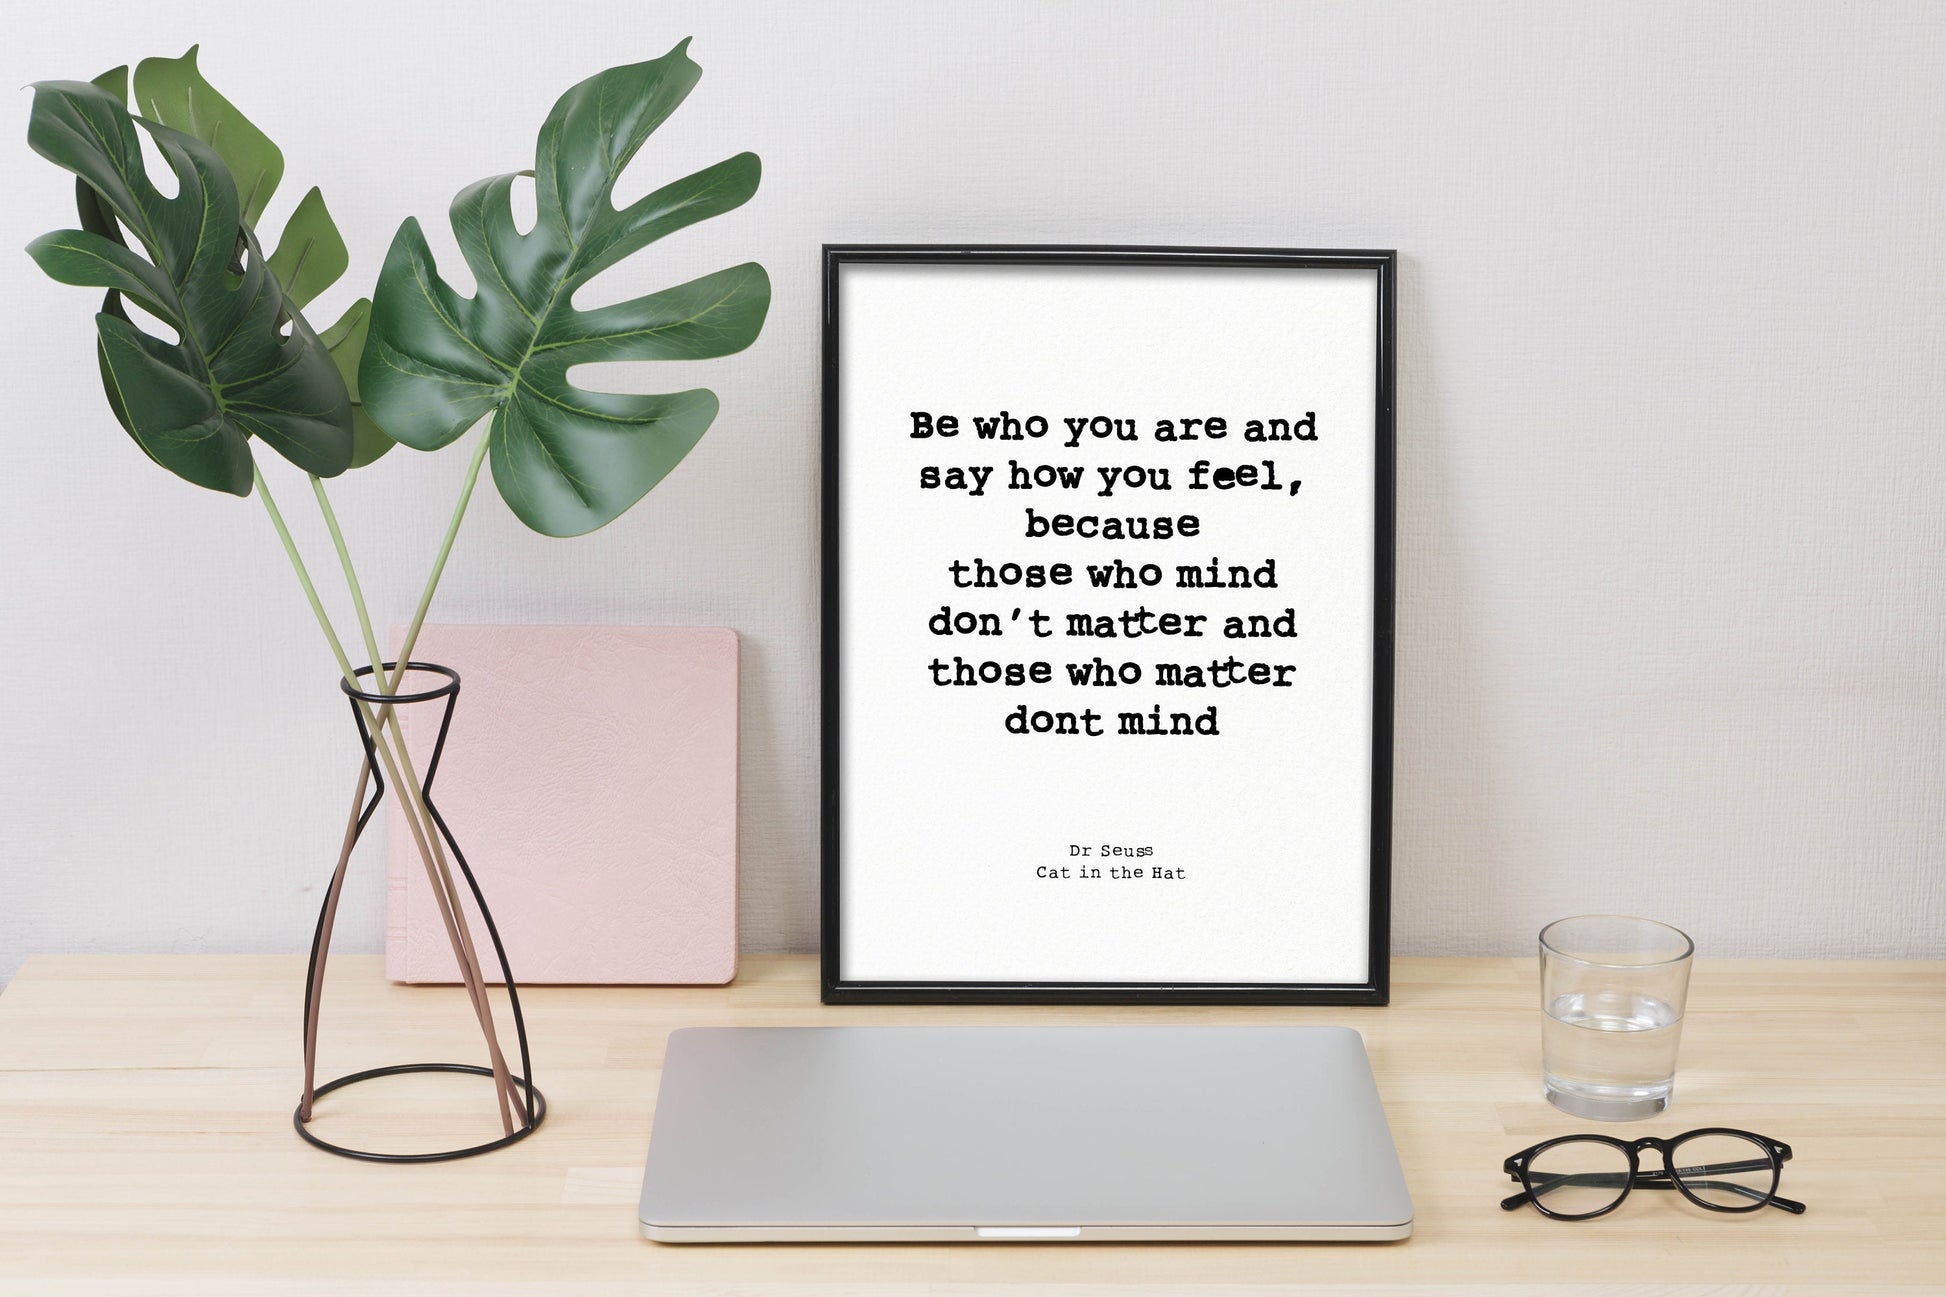 Dr Seuss Quote Poster - Cat in a Hat Print - Framed Philosophy Print - Be who you are quote - Inspirational Motivational Literature